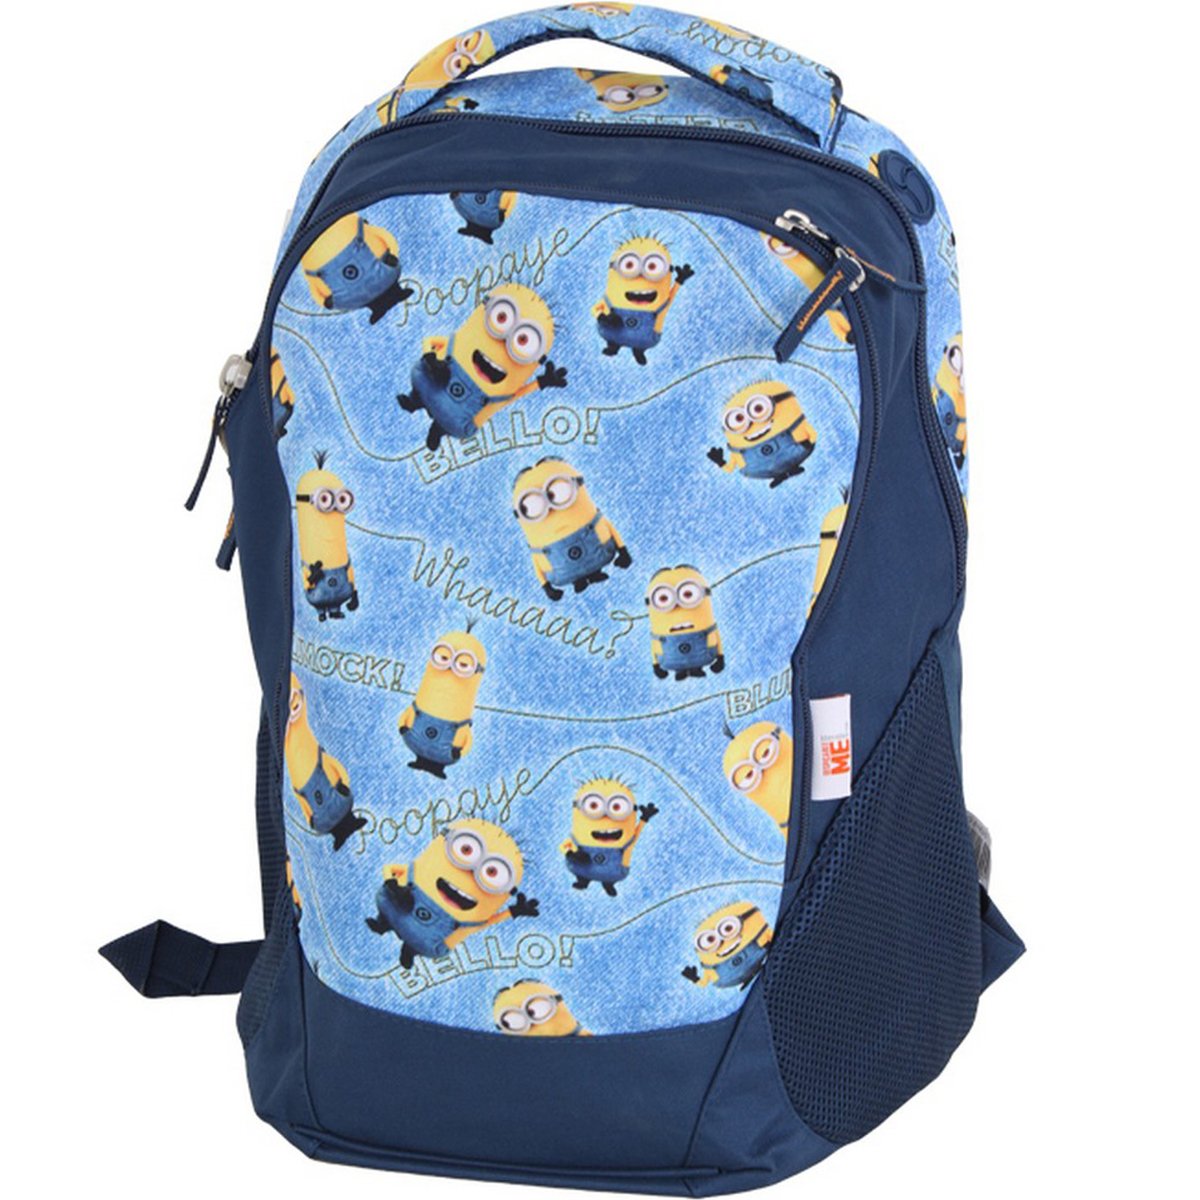 Minions School Backpack 81620 18inch